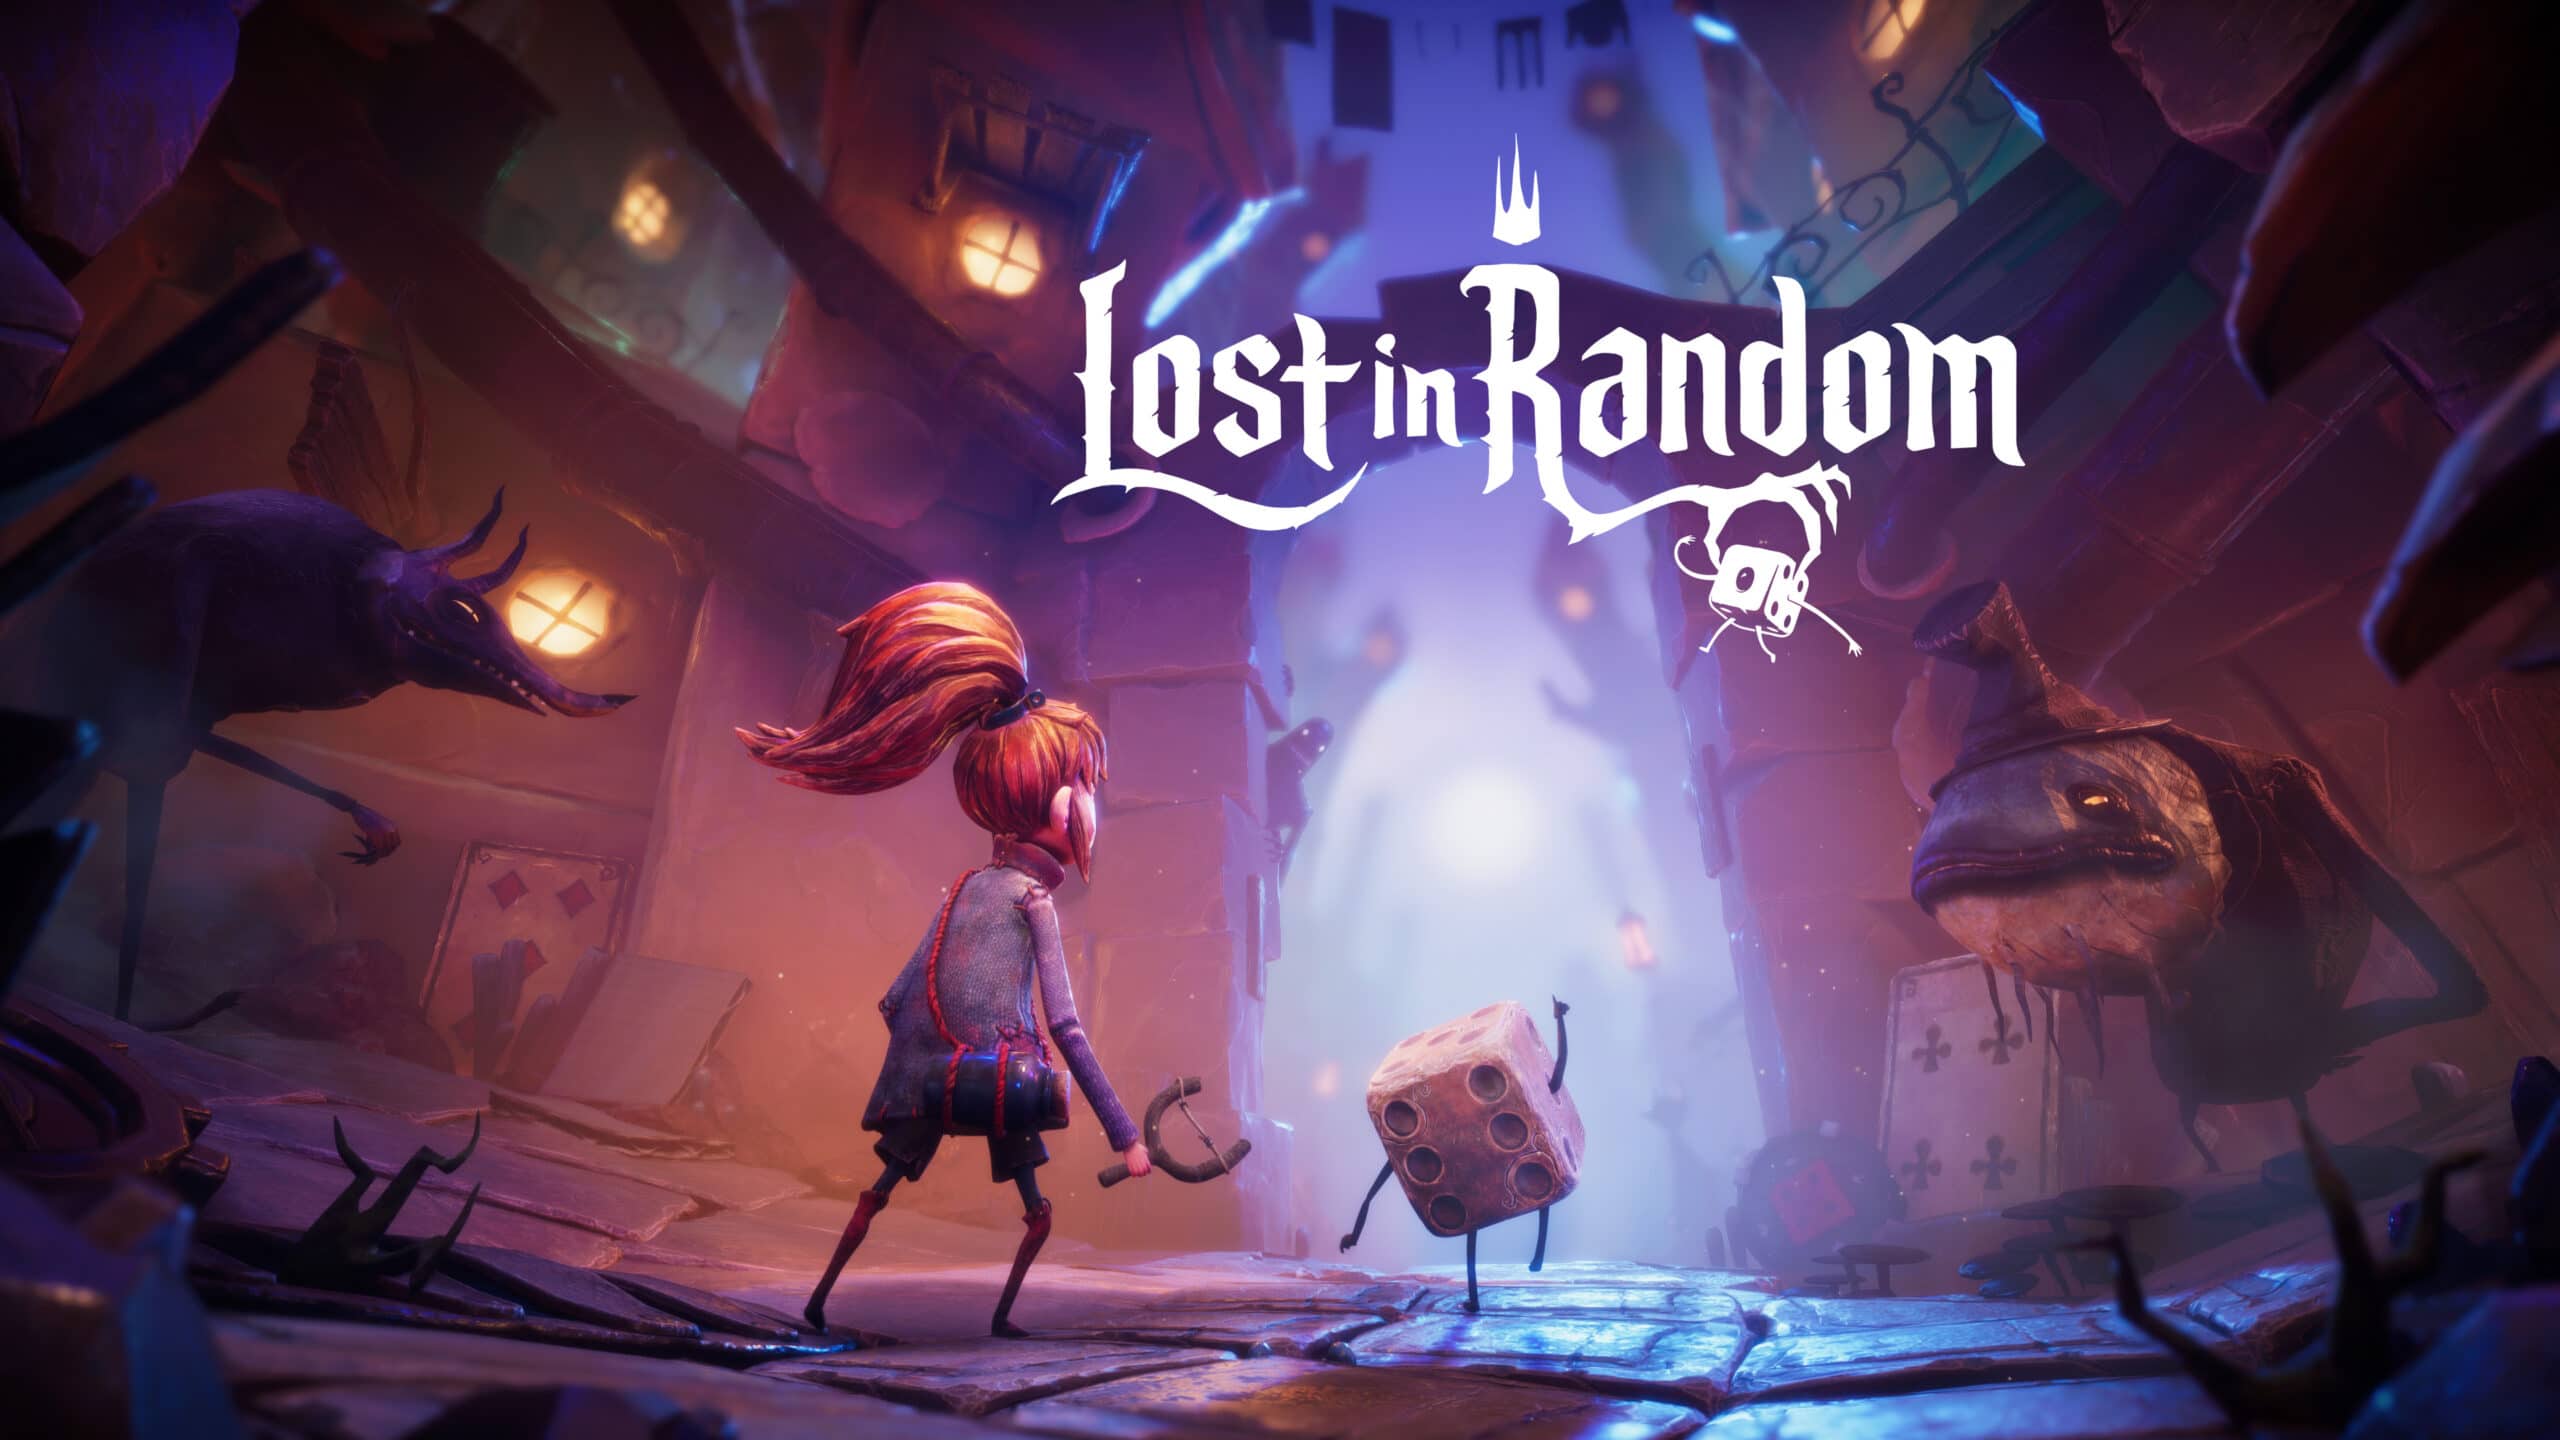 Lost In Random' is a new game from EA coming in 2021